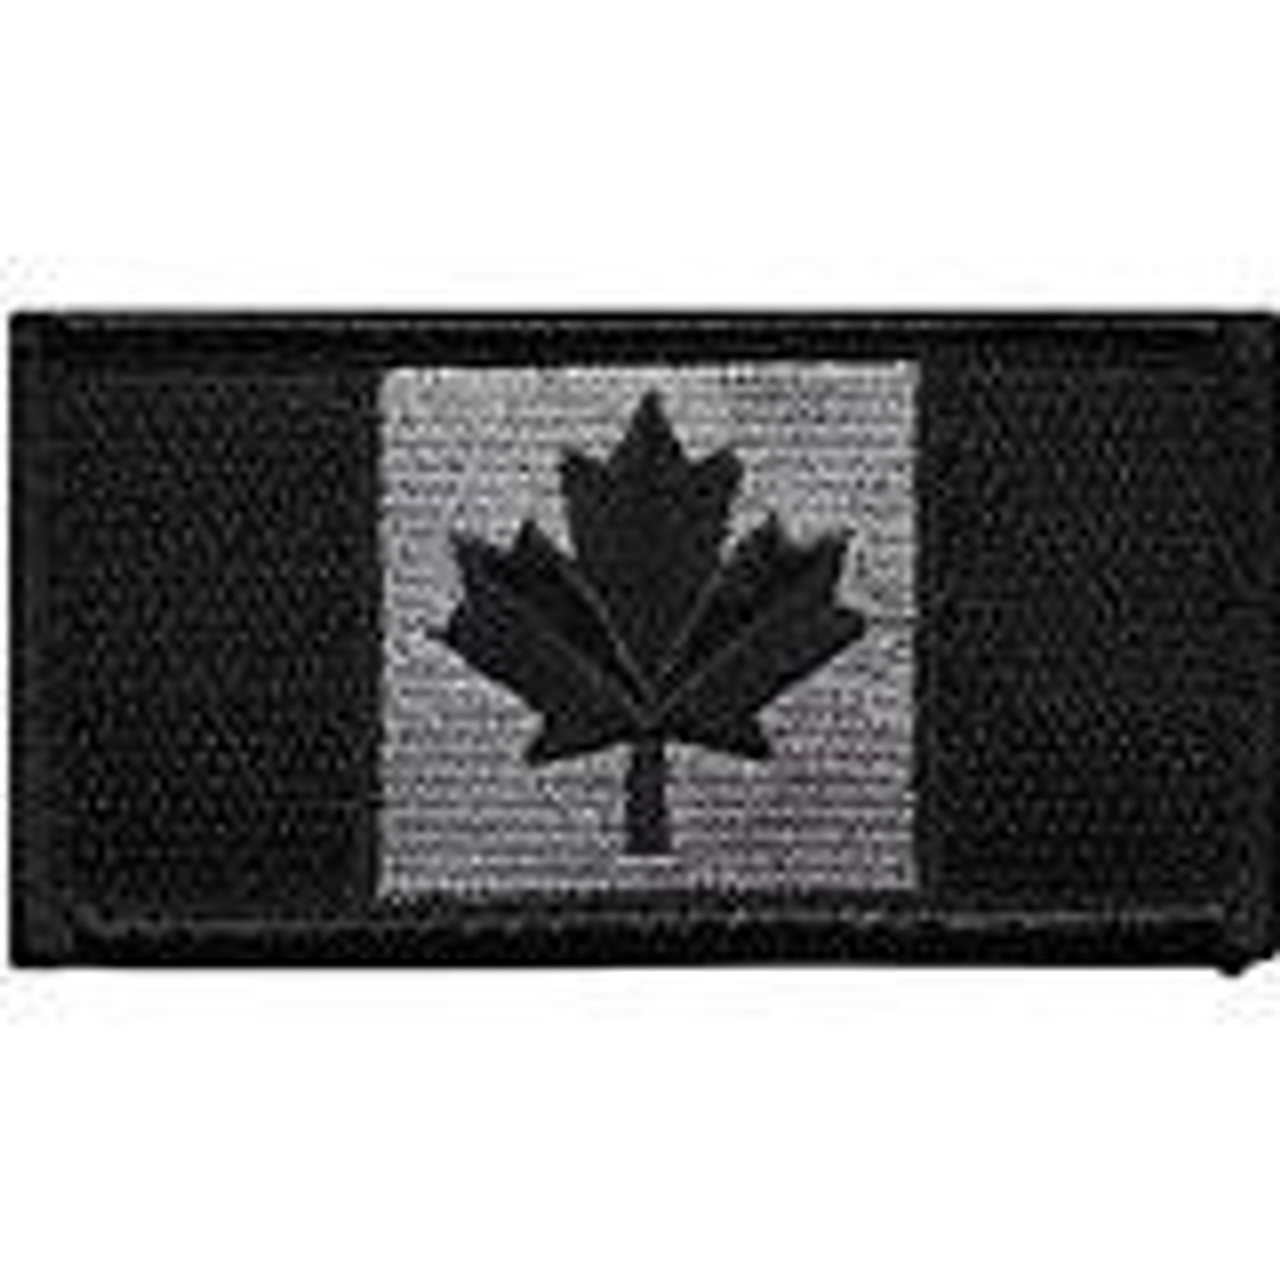 T91 - Tactical Patch - Sheriff - Velcro Canvas (3x2) - Olive